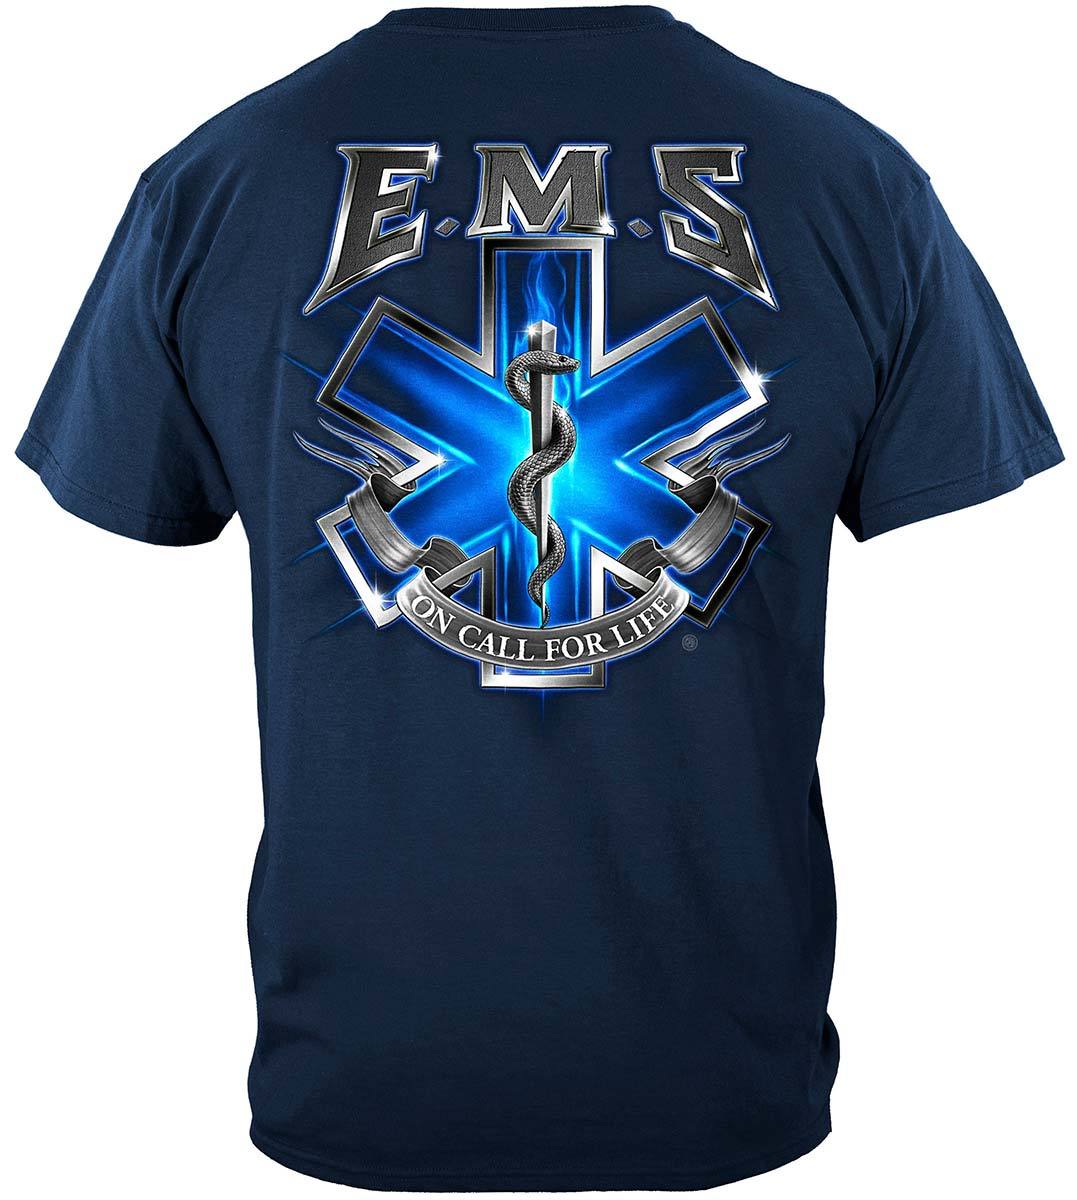 EMS On Call For Life EMS Premium Hooded Sweat Shirt